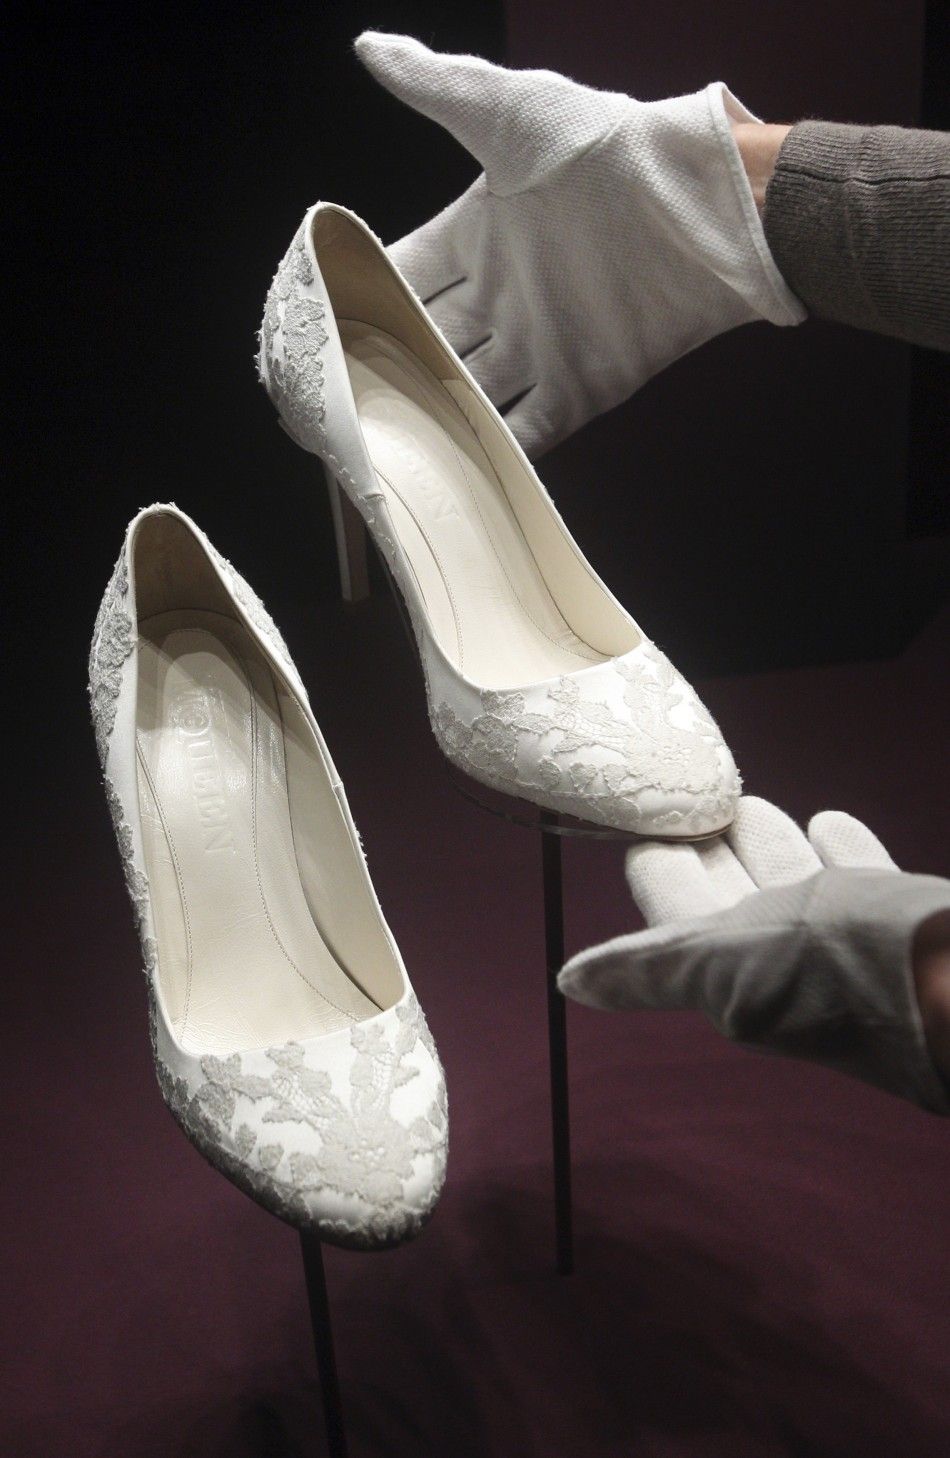 The bridal shoes of Britain039s Catherine, Duchess of Cambridge are seen at Buckingham Palace in London